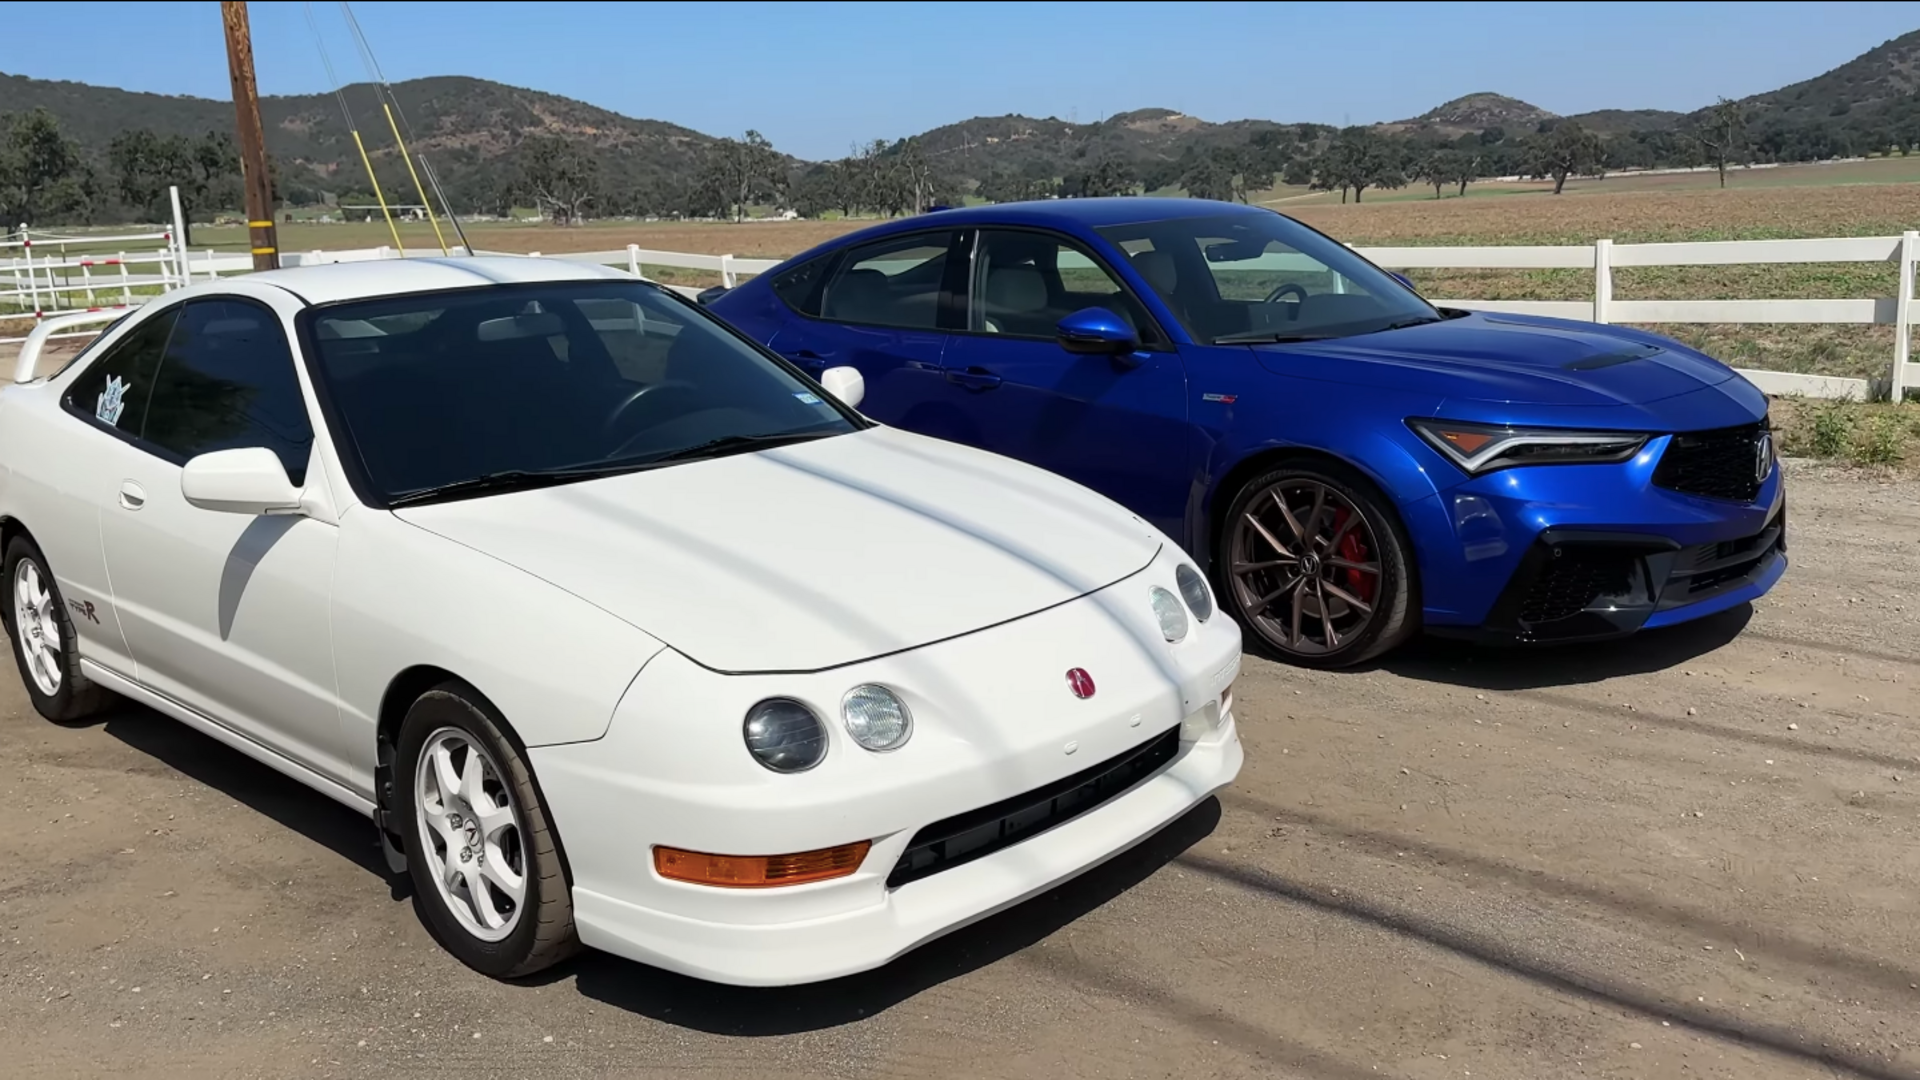 1998 Acura Integra Type R and 2024 Acura Integra Type S parked side by side